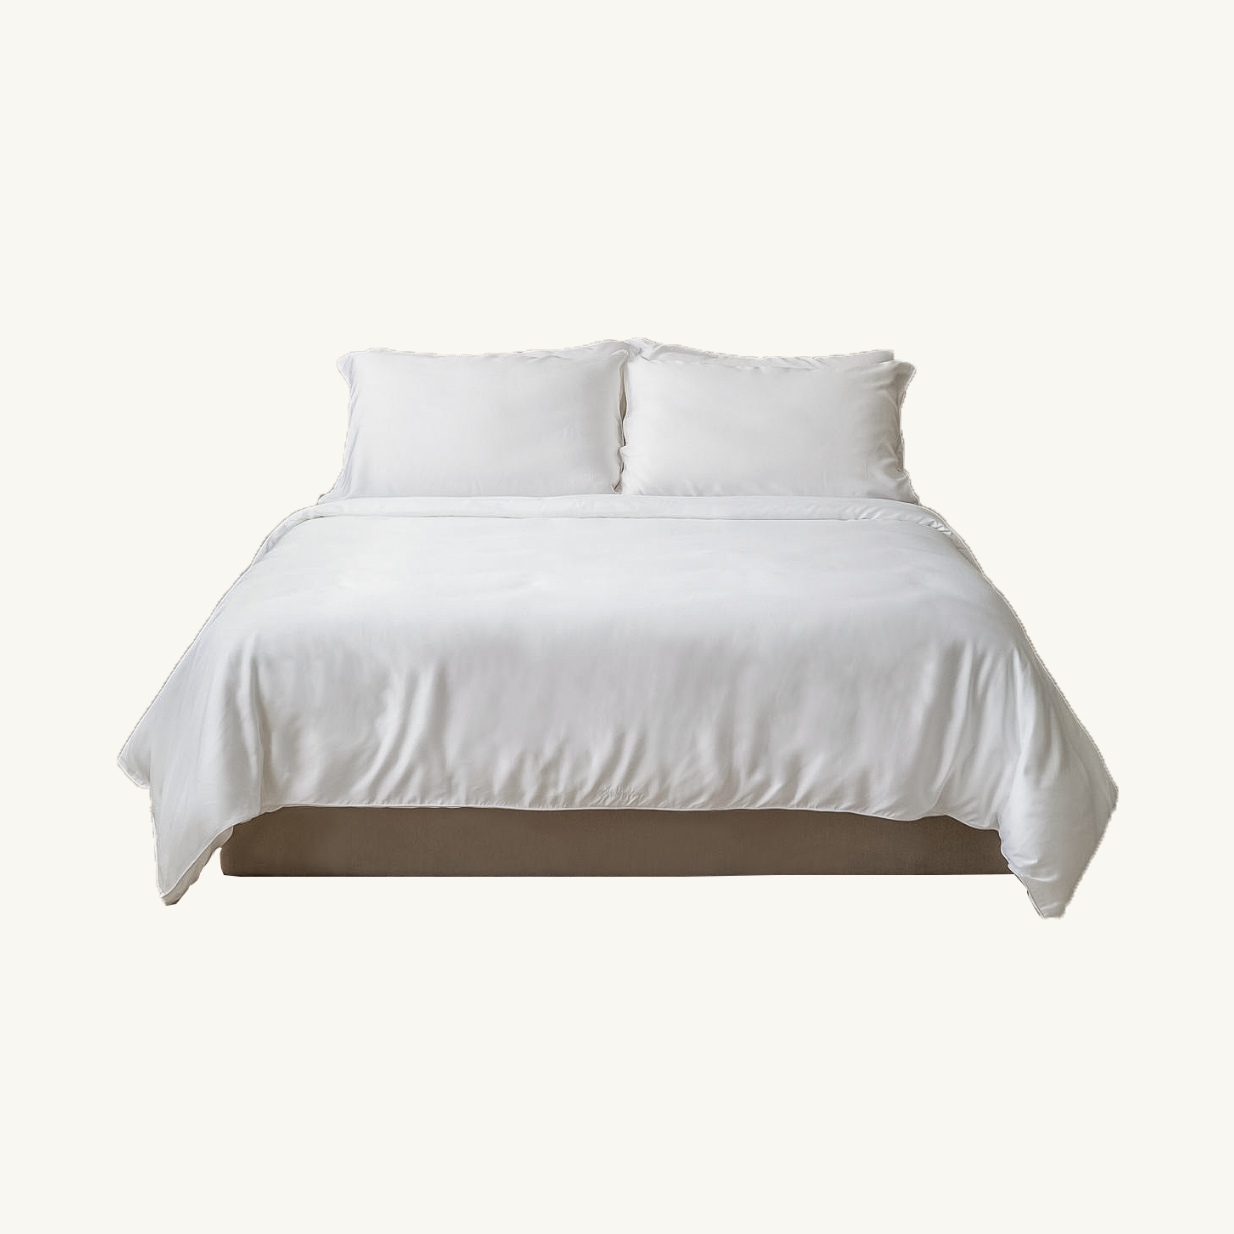 White TENCEL Bed Sheets Classic Set with Tencel Fitted Sheet, Tencel Pillow Case, Tencel Duvet Cover. Buy White Bed Sheets at Weavve Home, Best Bed Sheets Singapore and Luxury Hotel Sheets. 400 High Thread Count Bed Sheet. 